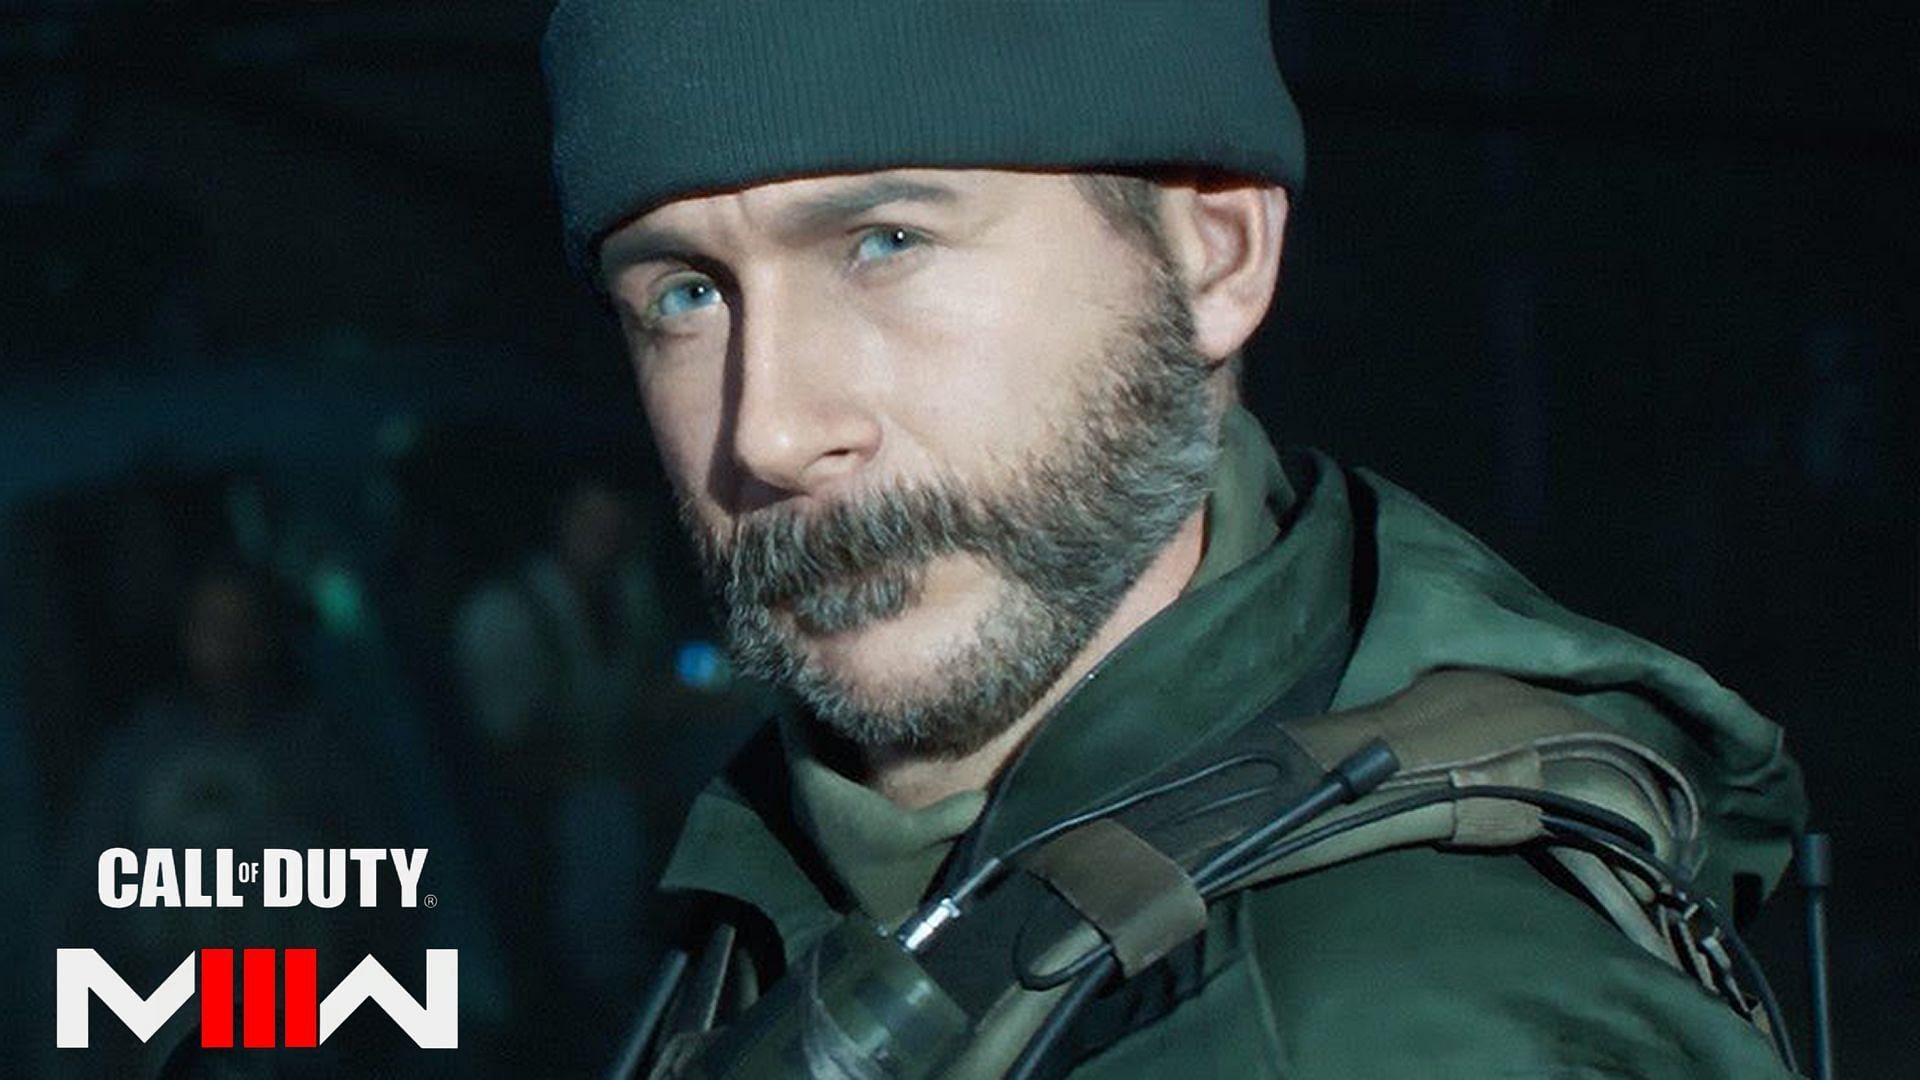 Captain Price with a beanie and a MW3 logo at the bottom left corner.